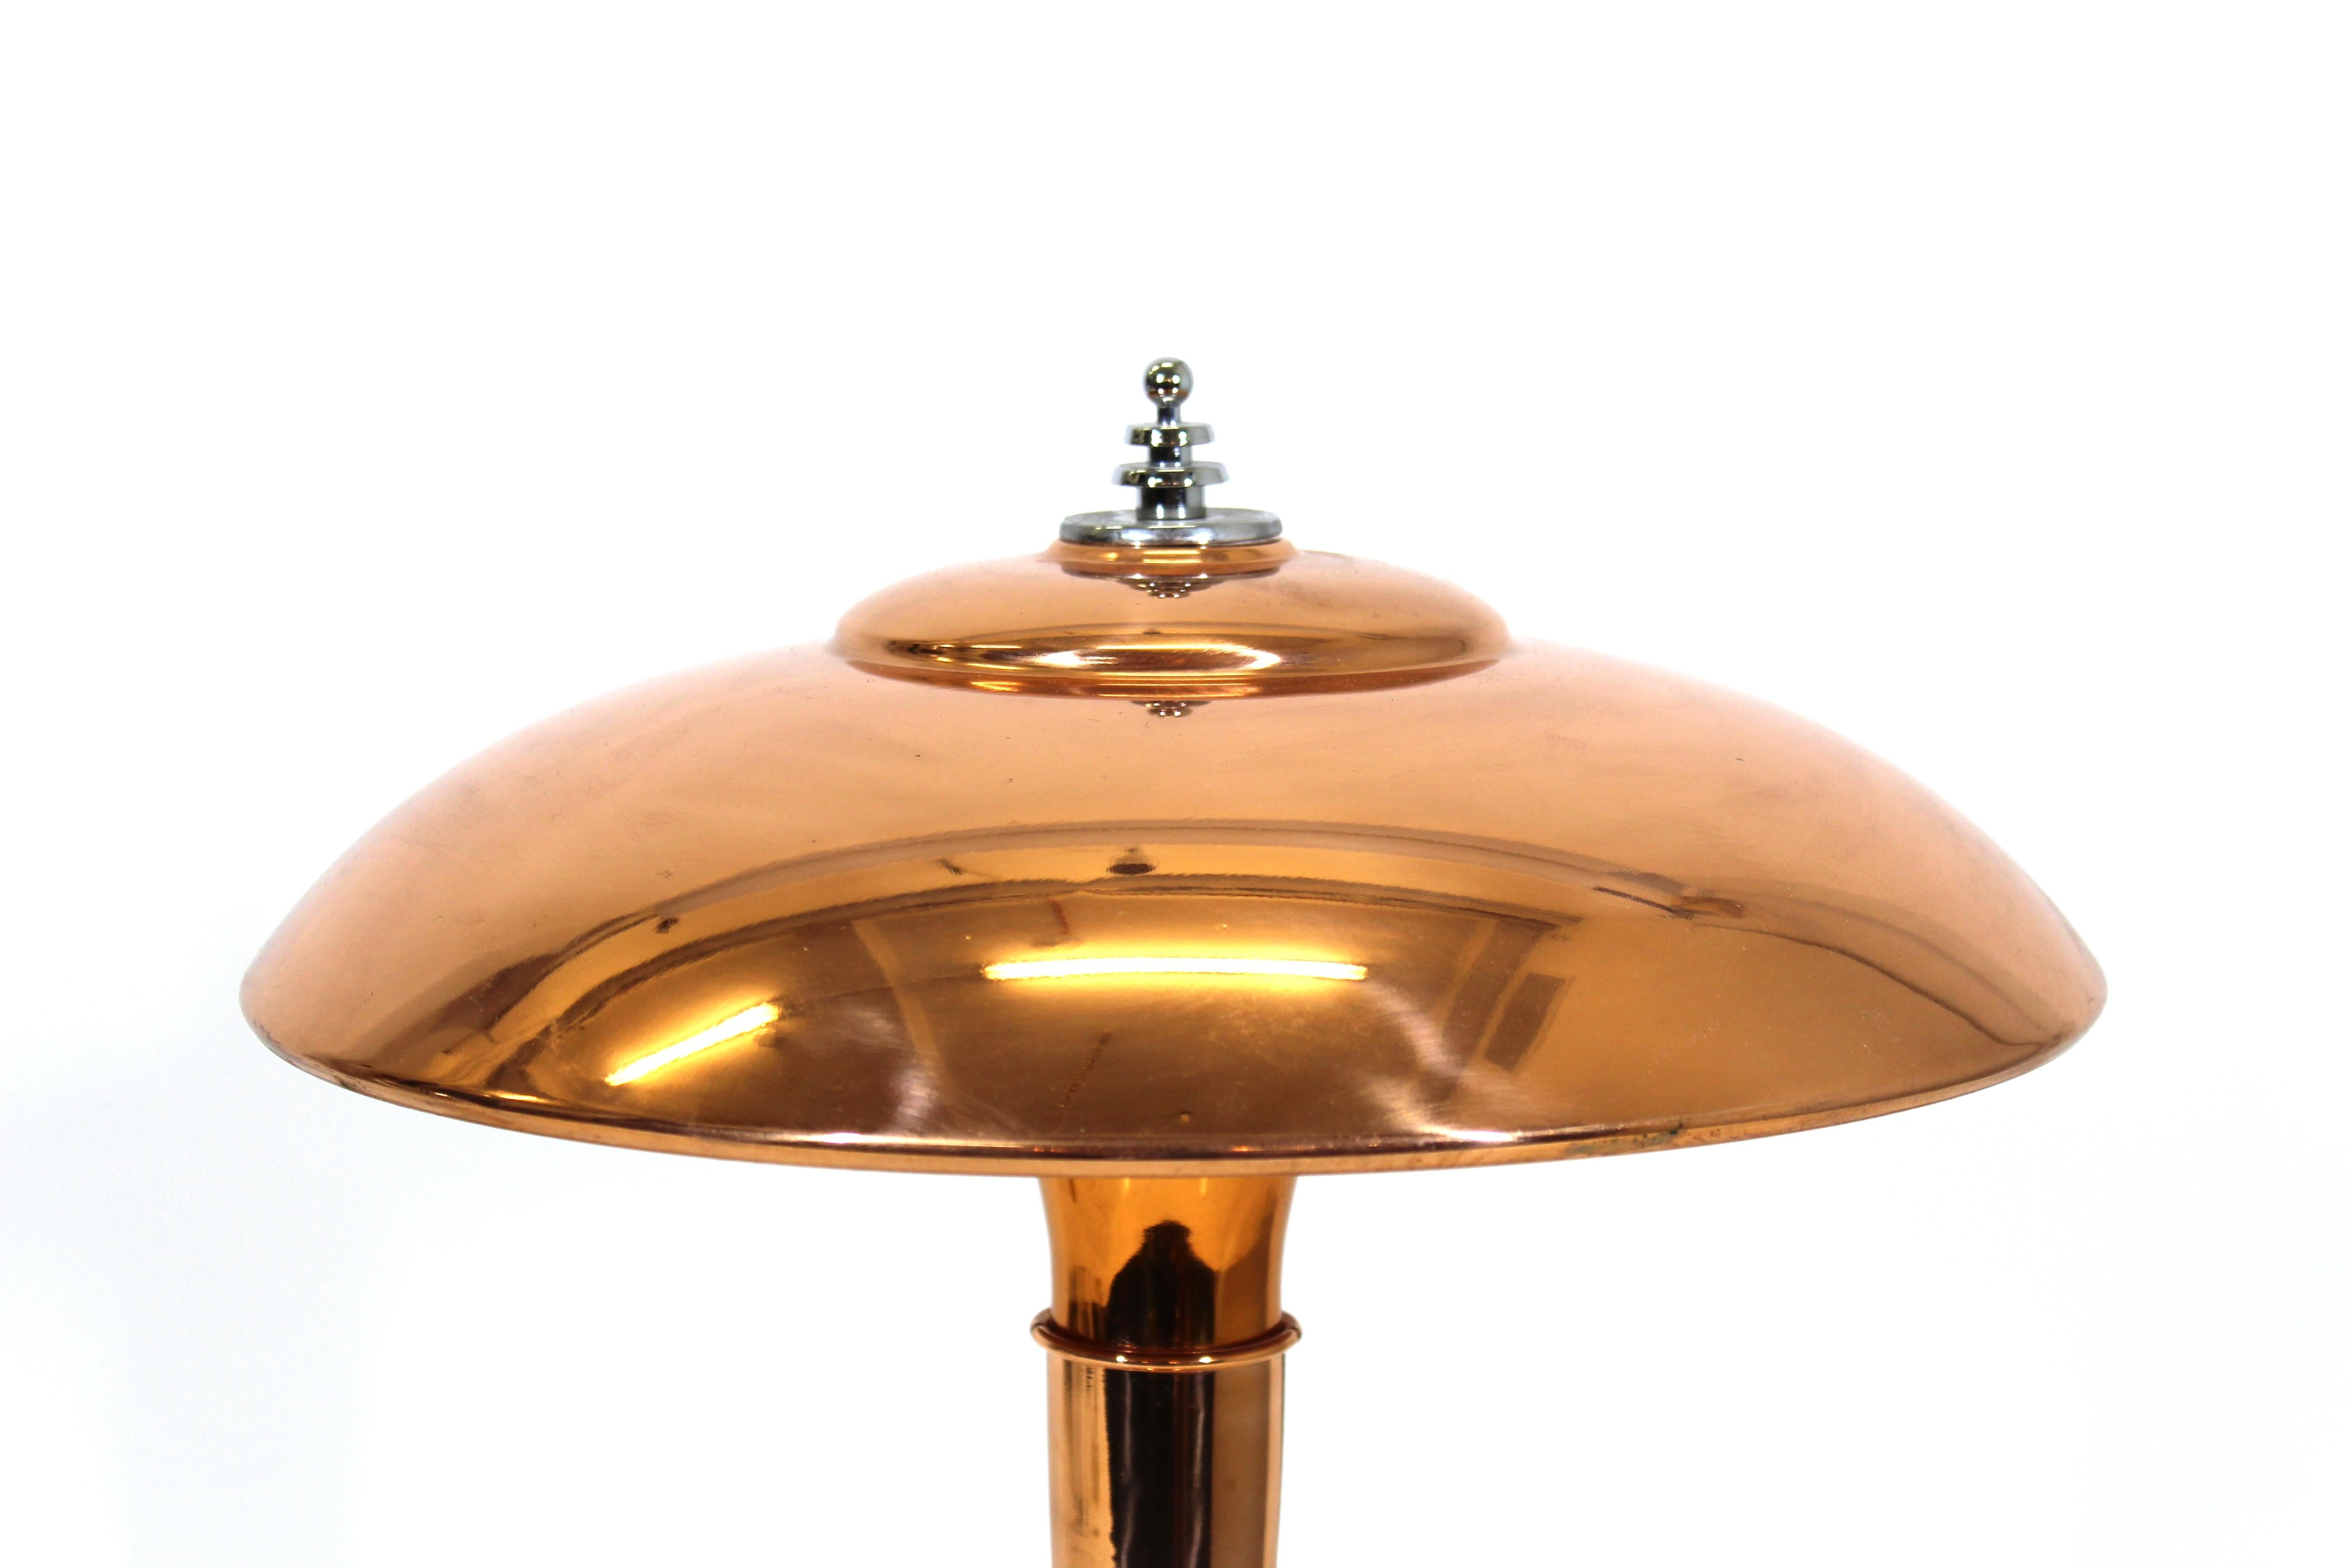 Bert Dickerson for Faries American Art Deco 'Guardsman' table lamp with streamlined shape in polished brass and chrome plated metal elements. 17.5